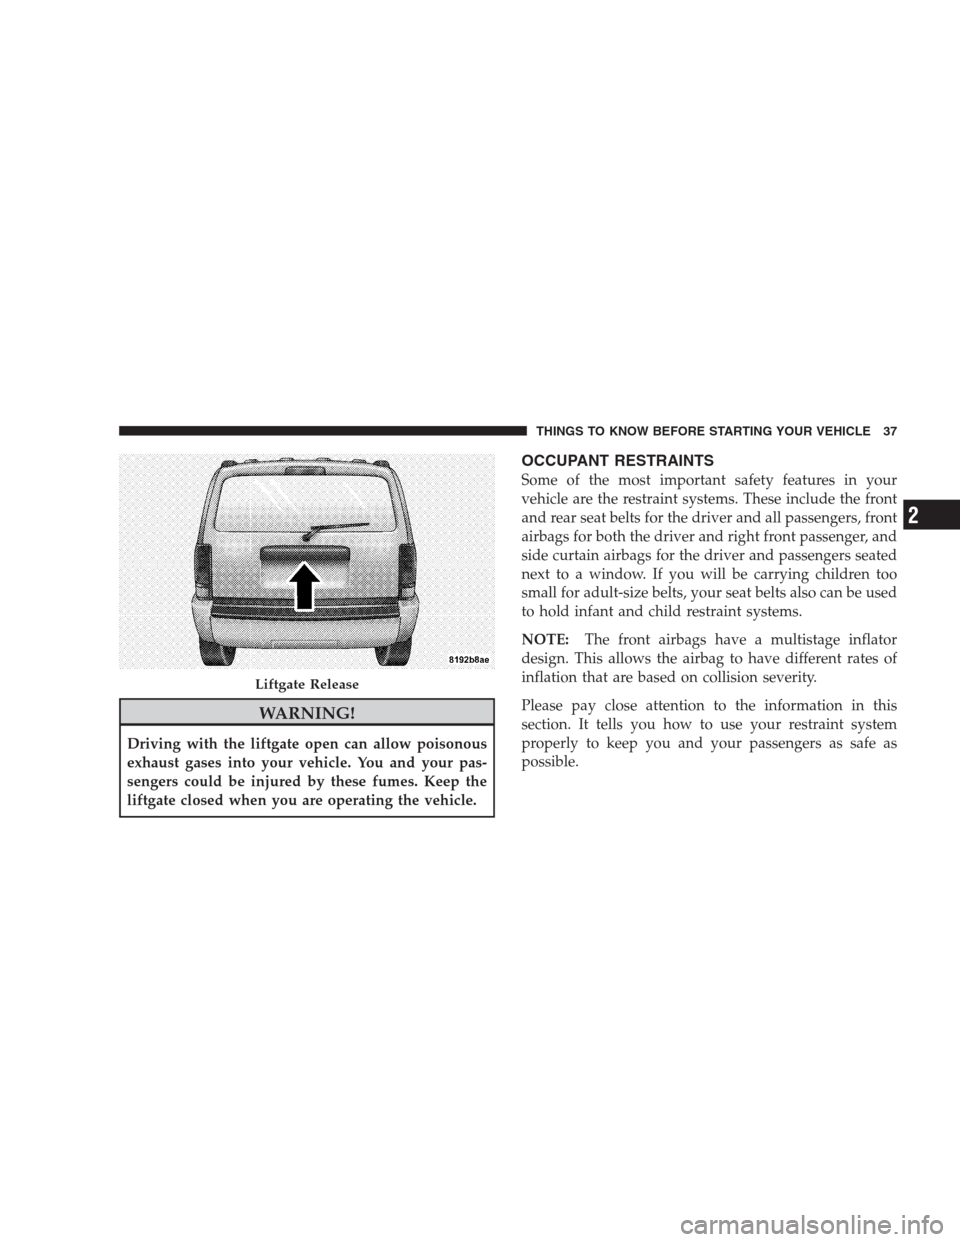 DODGE NITRO 2009 1.G Owners Manual WARNING!
Driving with the liftgate open can allow poisonous
exhaust gases into your vehicle. You and your pas-
sengers could be injured by these fumes. Keep the
liftgate closed when you are operating 